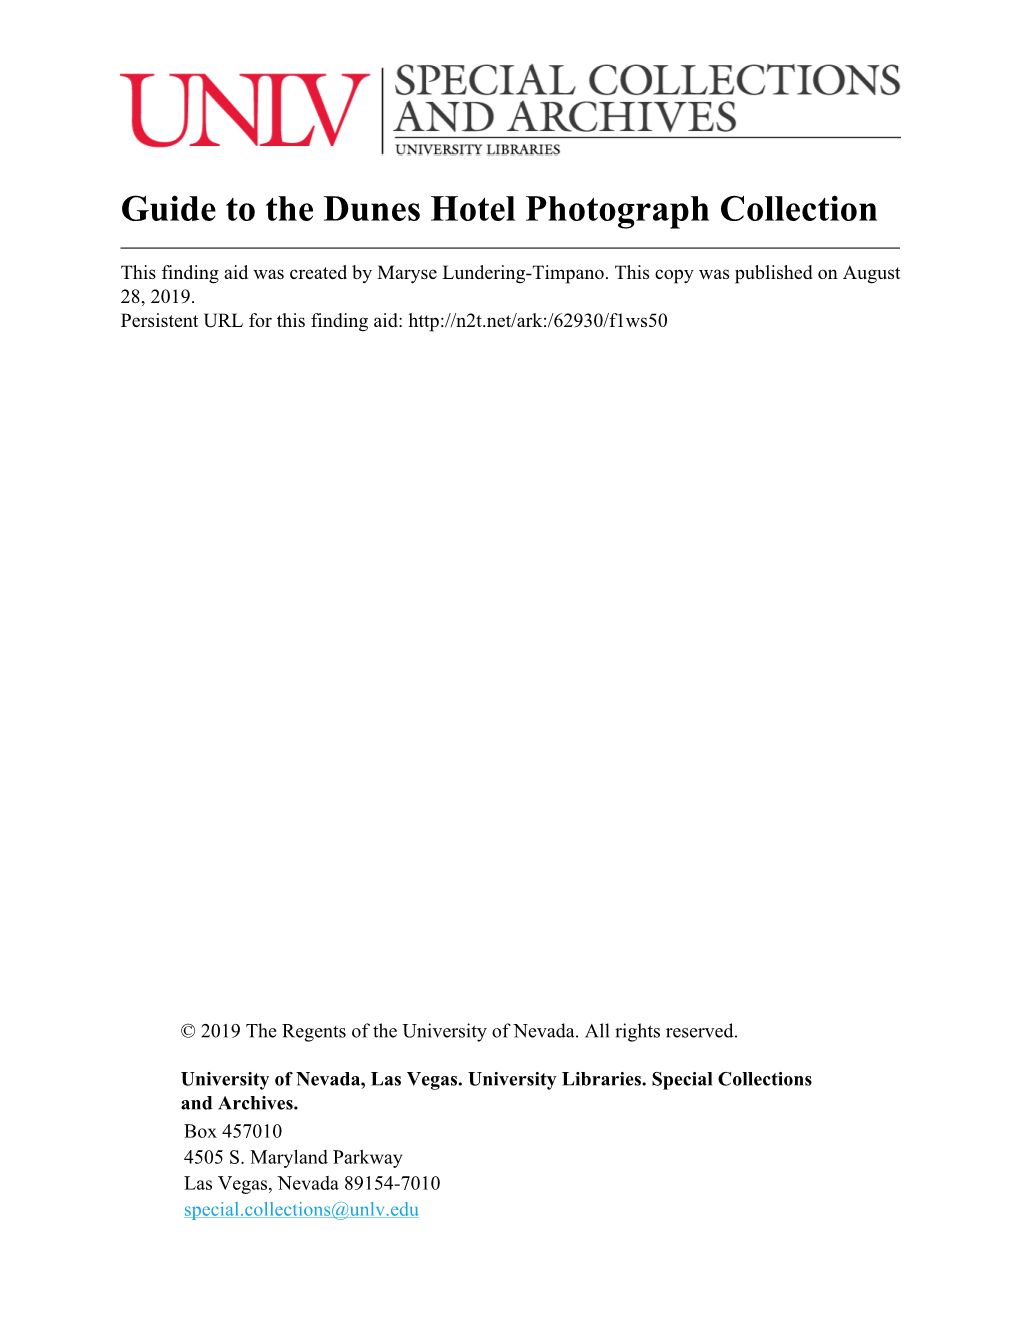 Guide to the Dunes Hotel Photograph Collection